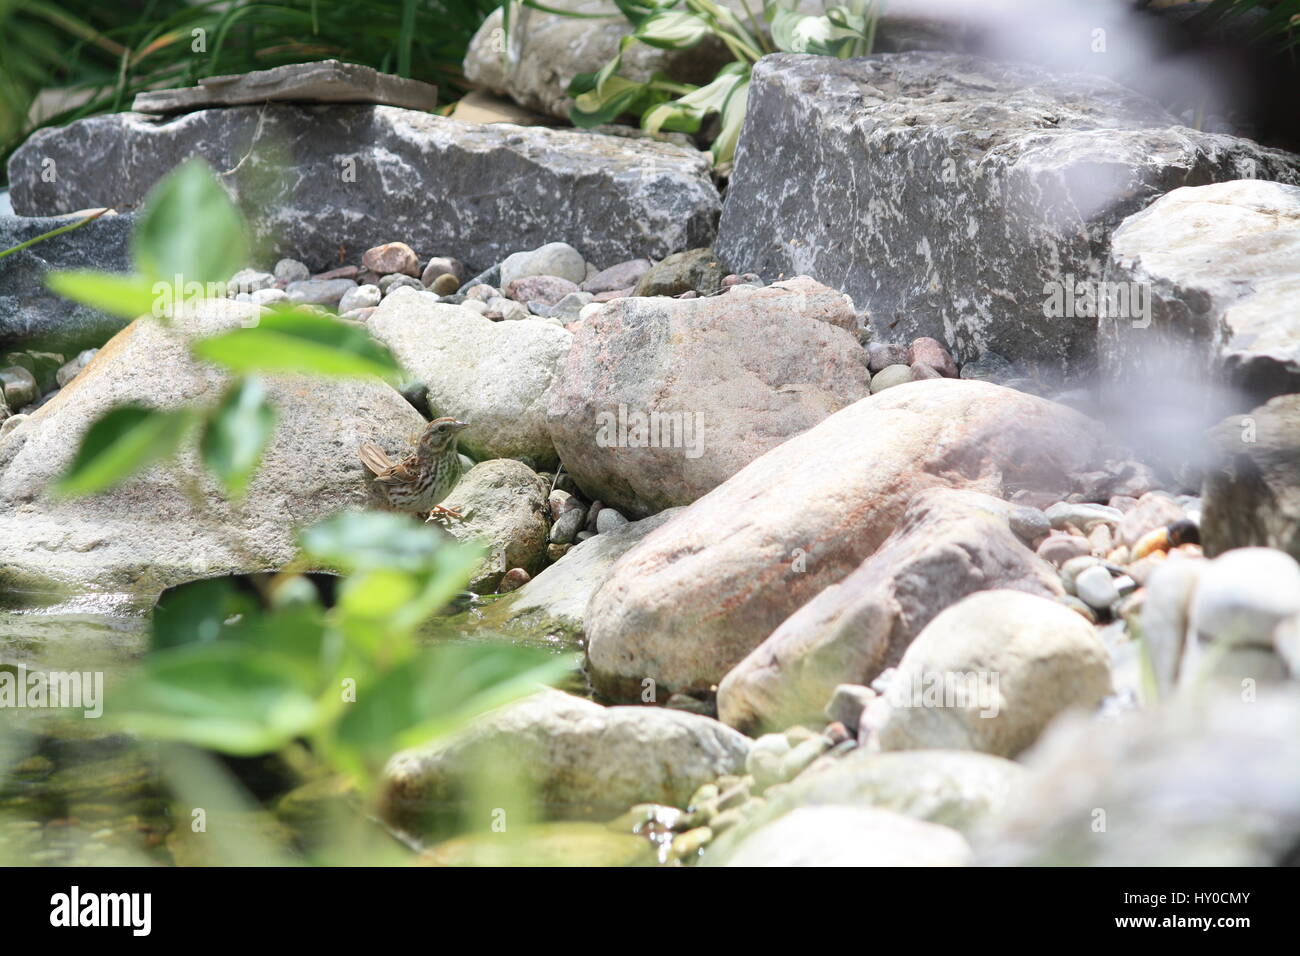 Bird taking a break by the backyard pond for a drink and bath, can you spot him? Stock Photo